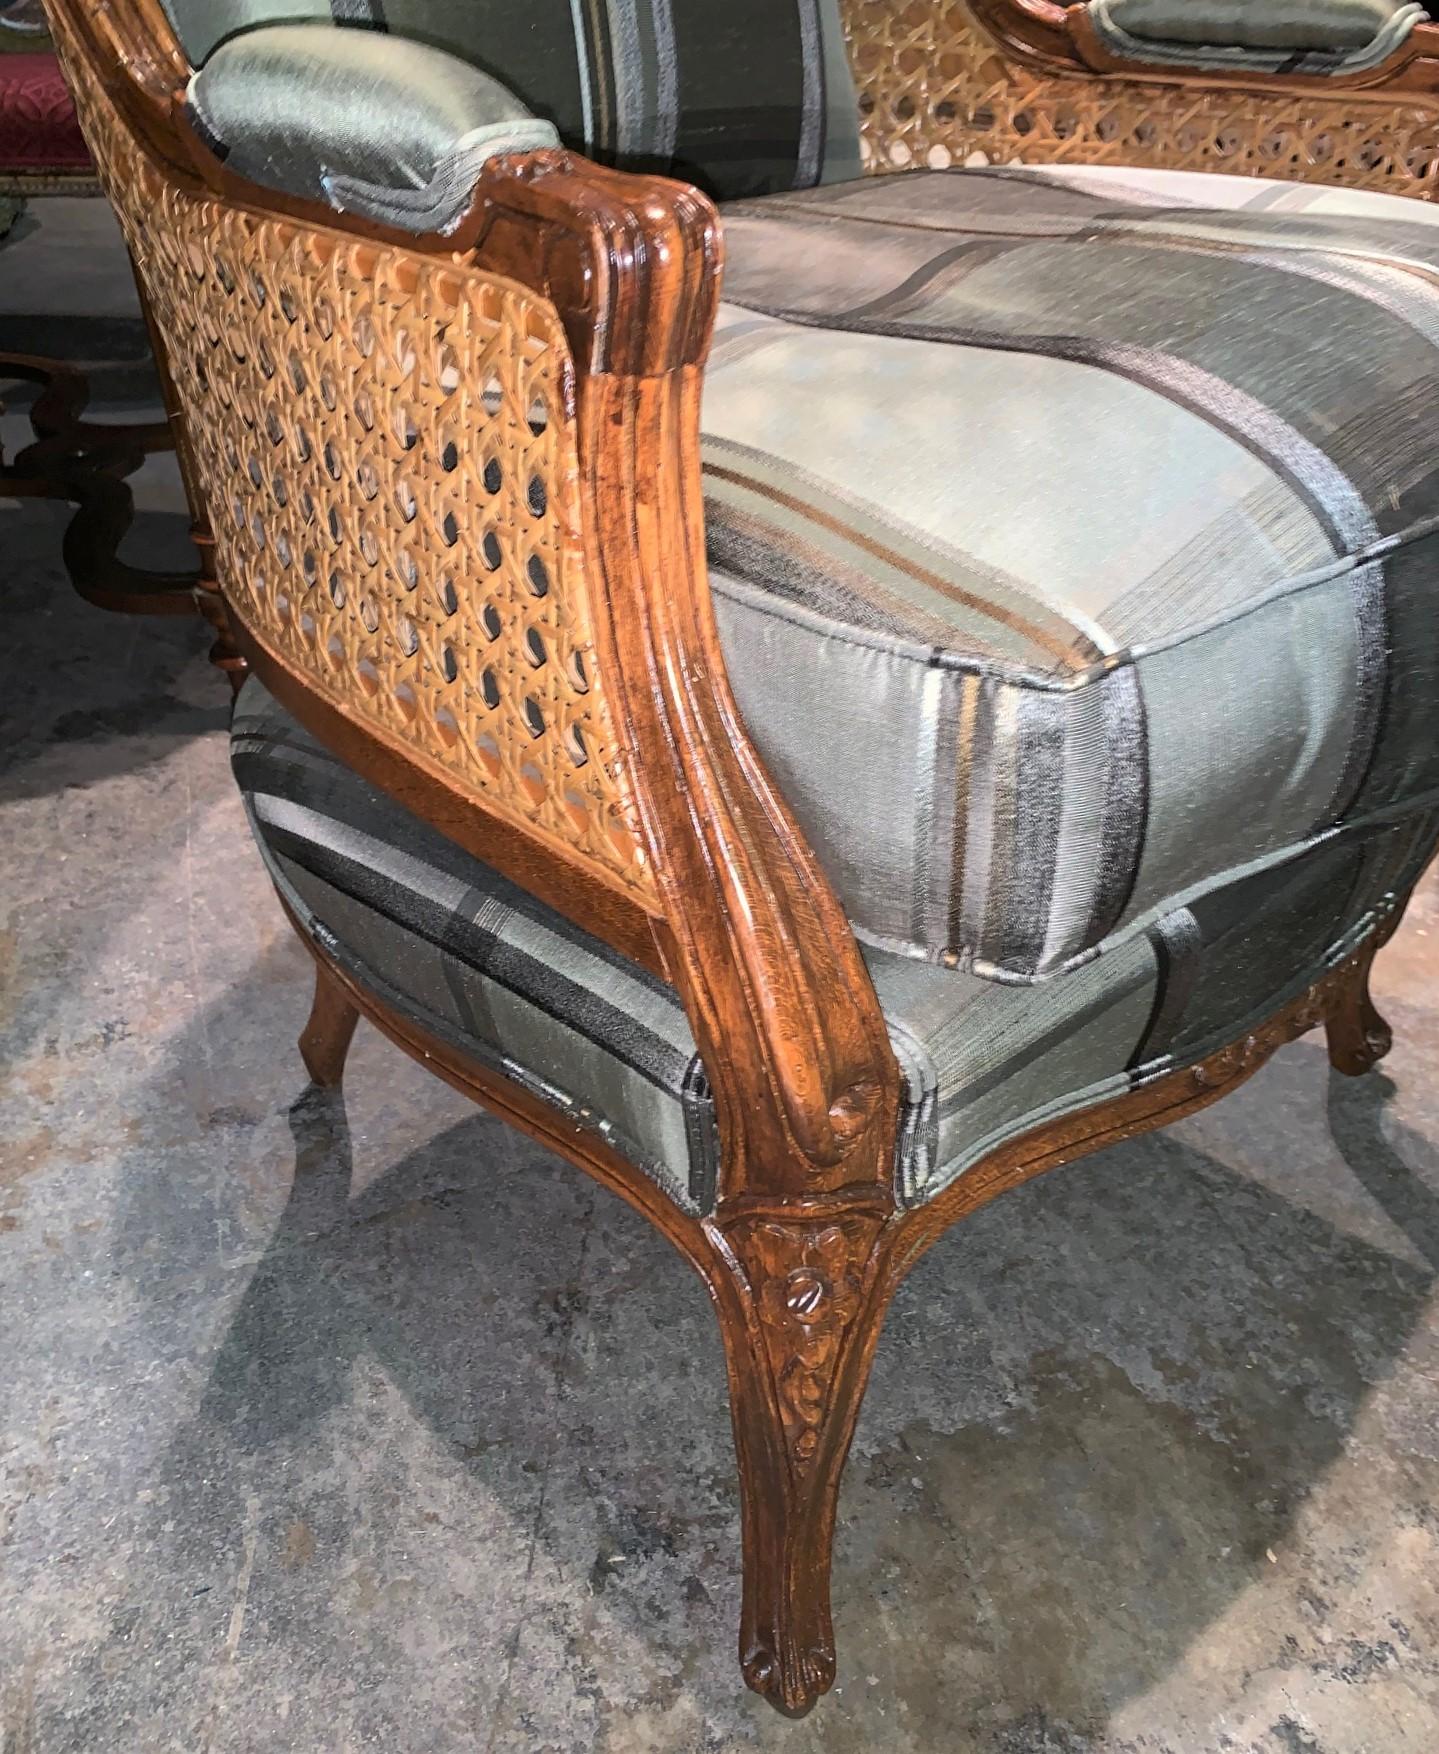 Outstanding pair of Louis XV style custom crafted walnut dome chairs or balloon chairs with superior double caning and hand carved crests. Each resting on cabriole legs. Perfectly proportioned. Ready for your creative design.